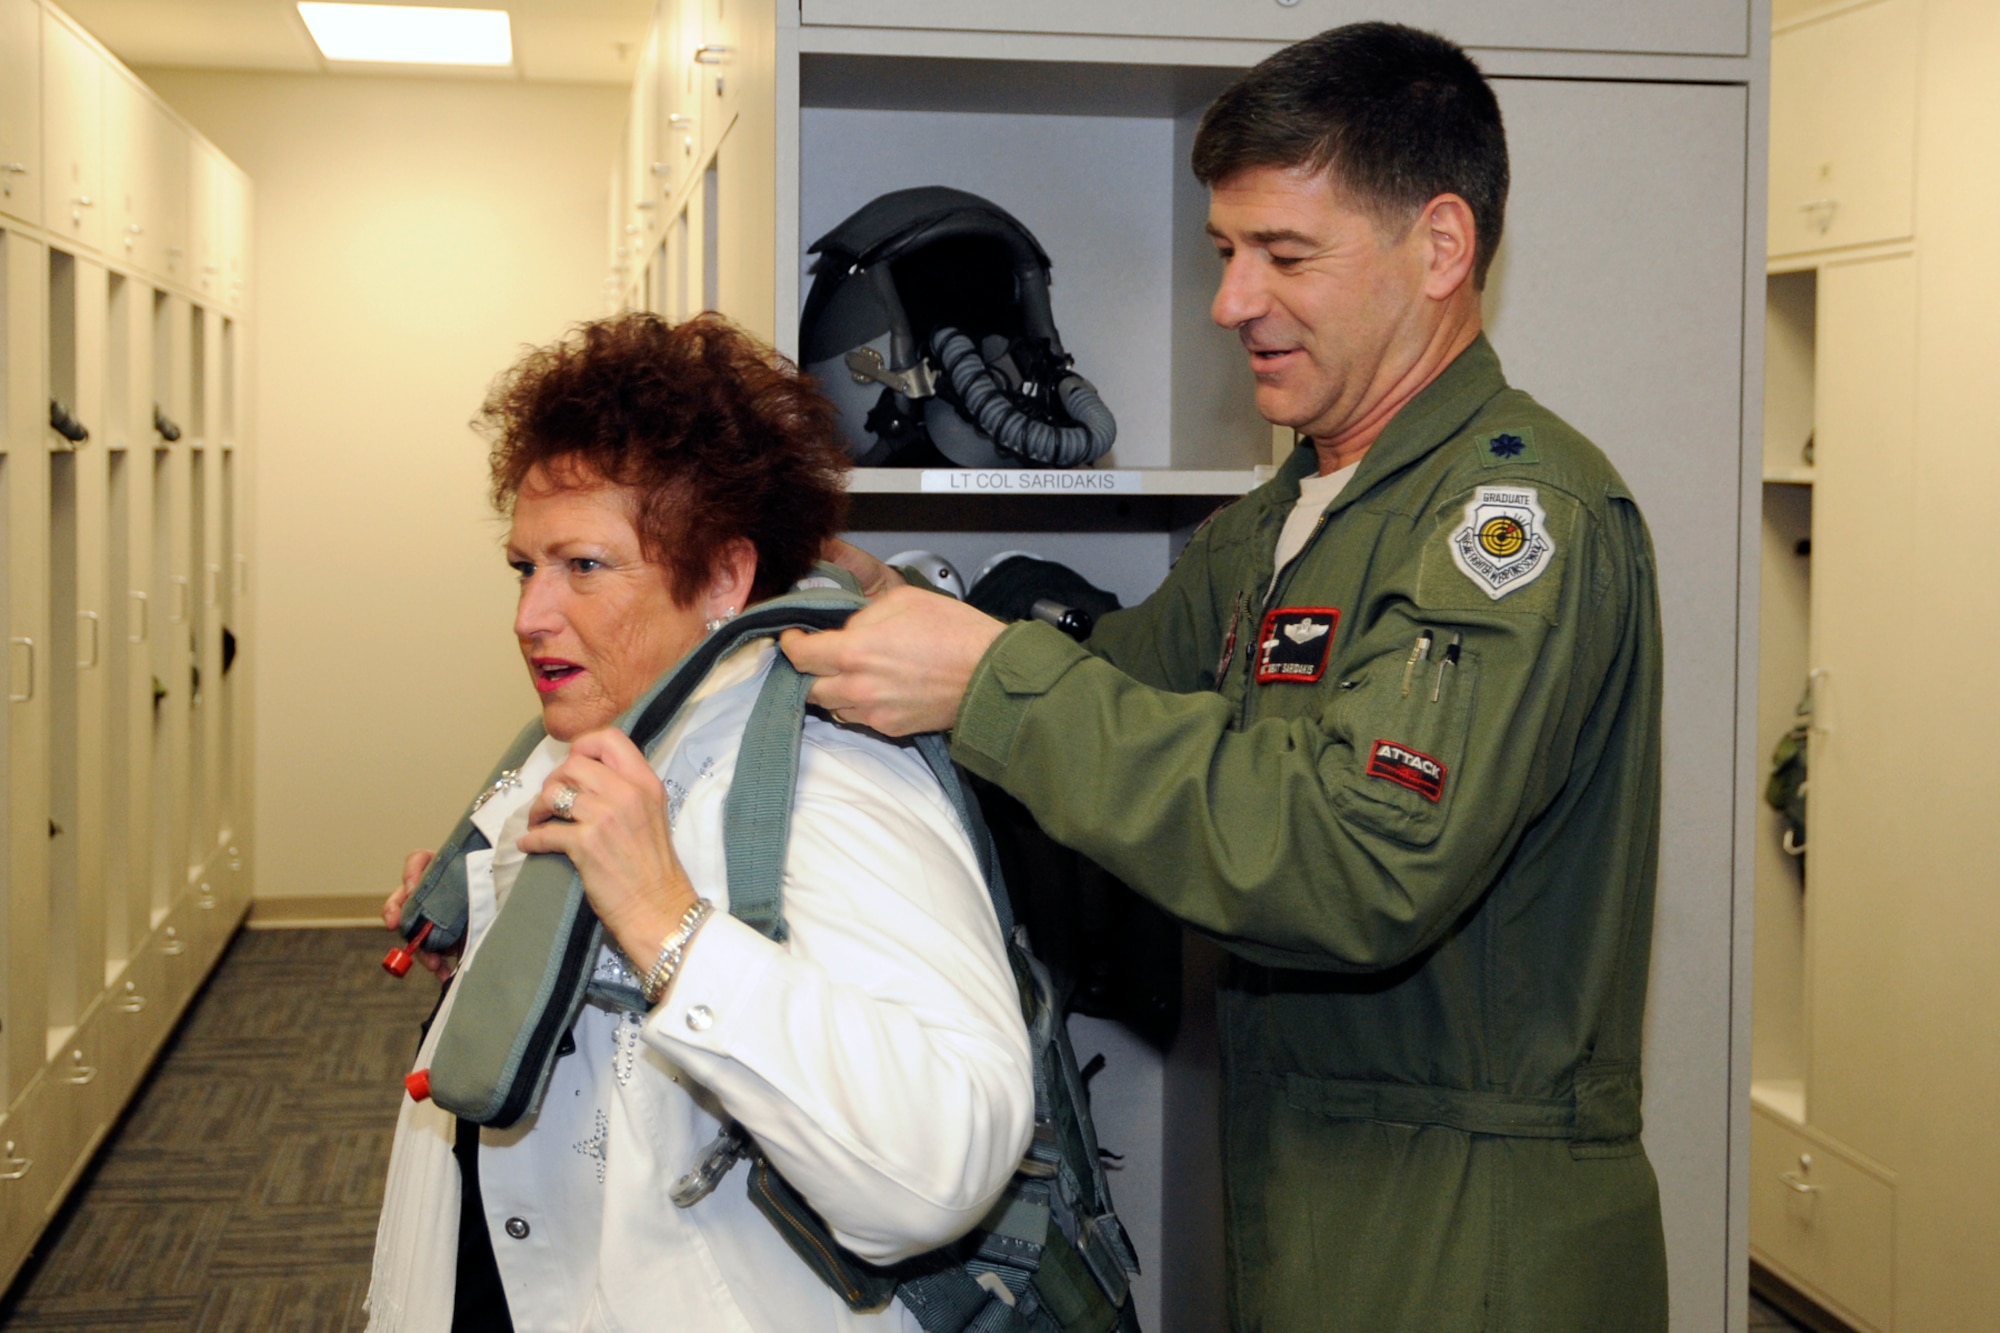 City of Mt. Clemens Mayor Barbara Dempsey tries on a Life Preserver Unit-34-P with a little help from Lt. Col. Emmanuel Saridakis, 107th Fighter Squadron Commander, following a ribbon cutting for the new $6.6 million Operations Facility on February 22 at Selfridge Air National Guard Base, Mich.  The new building will be home to the Operations Group command staff, the 107th Fighter Squadron and the 127th Operations Support Flight.  (photo by John S. Swanson)